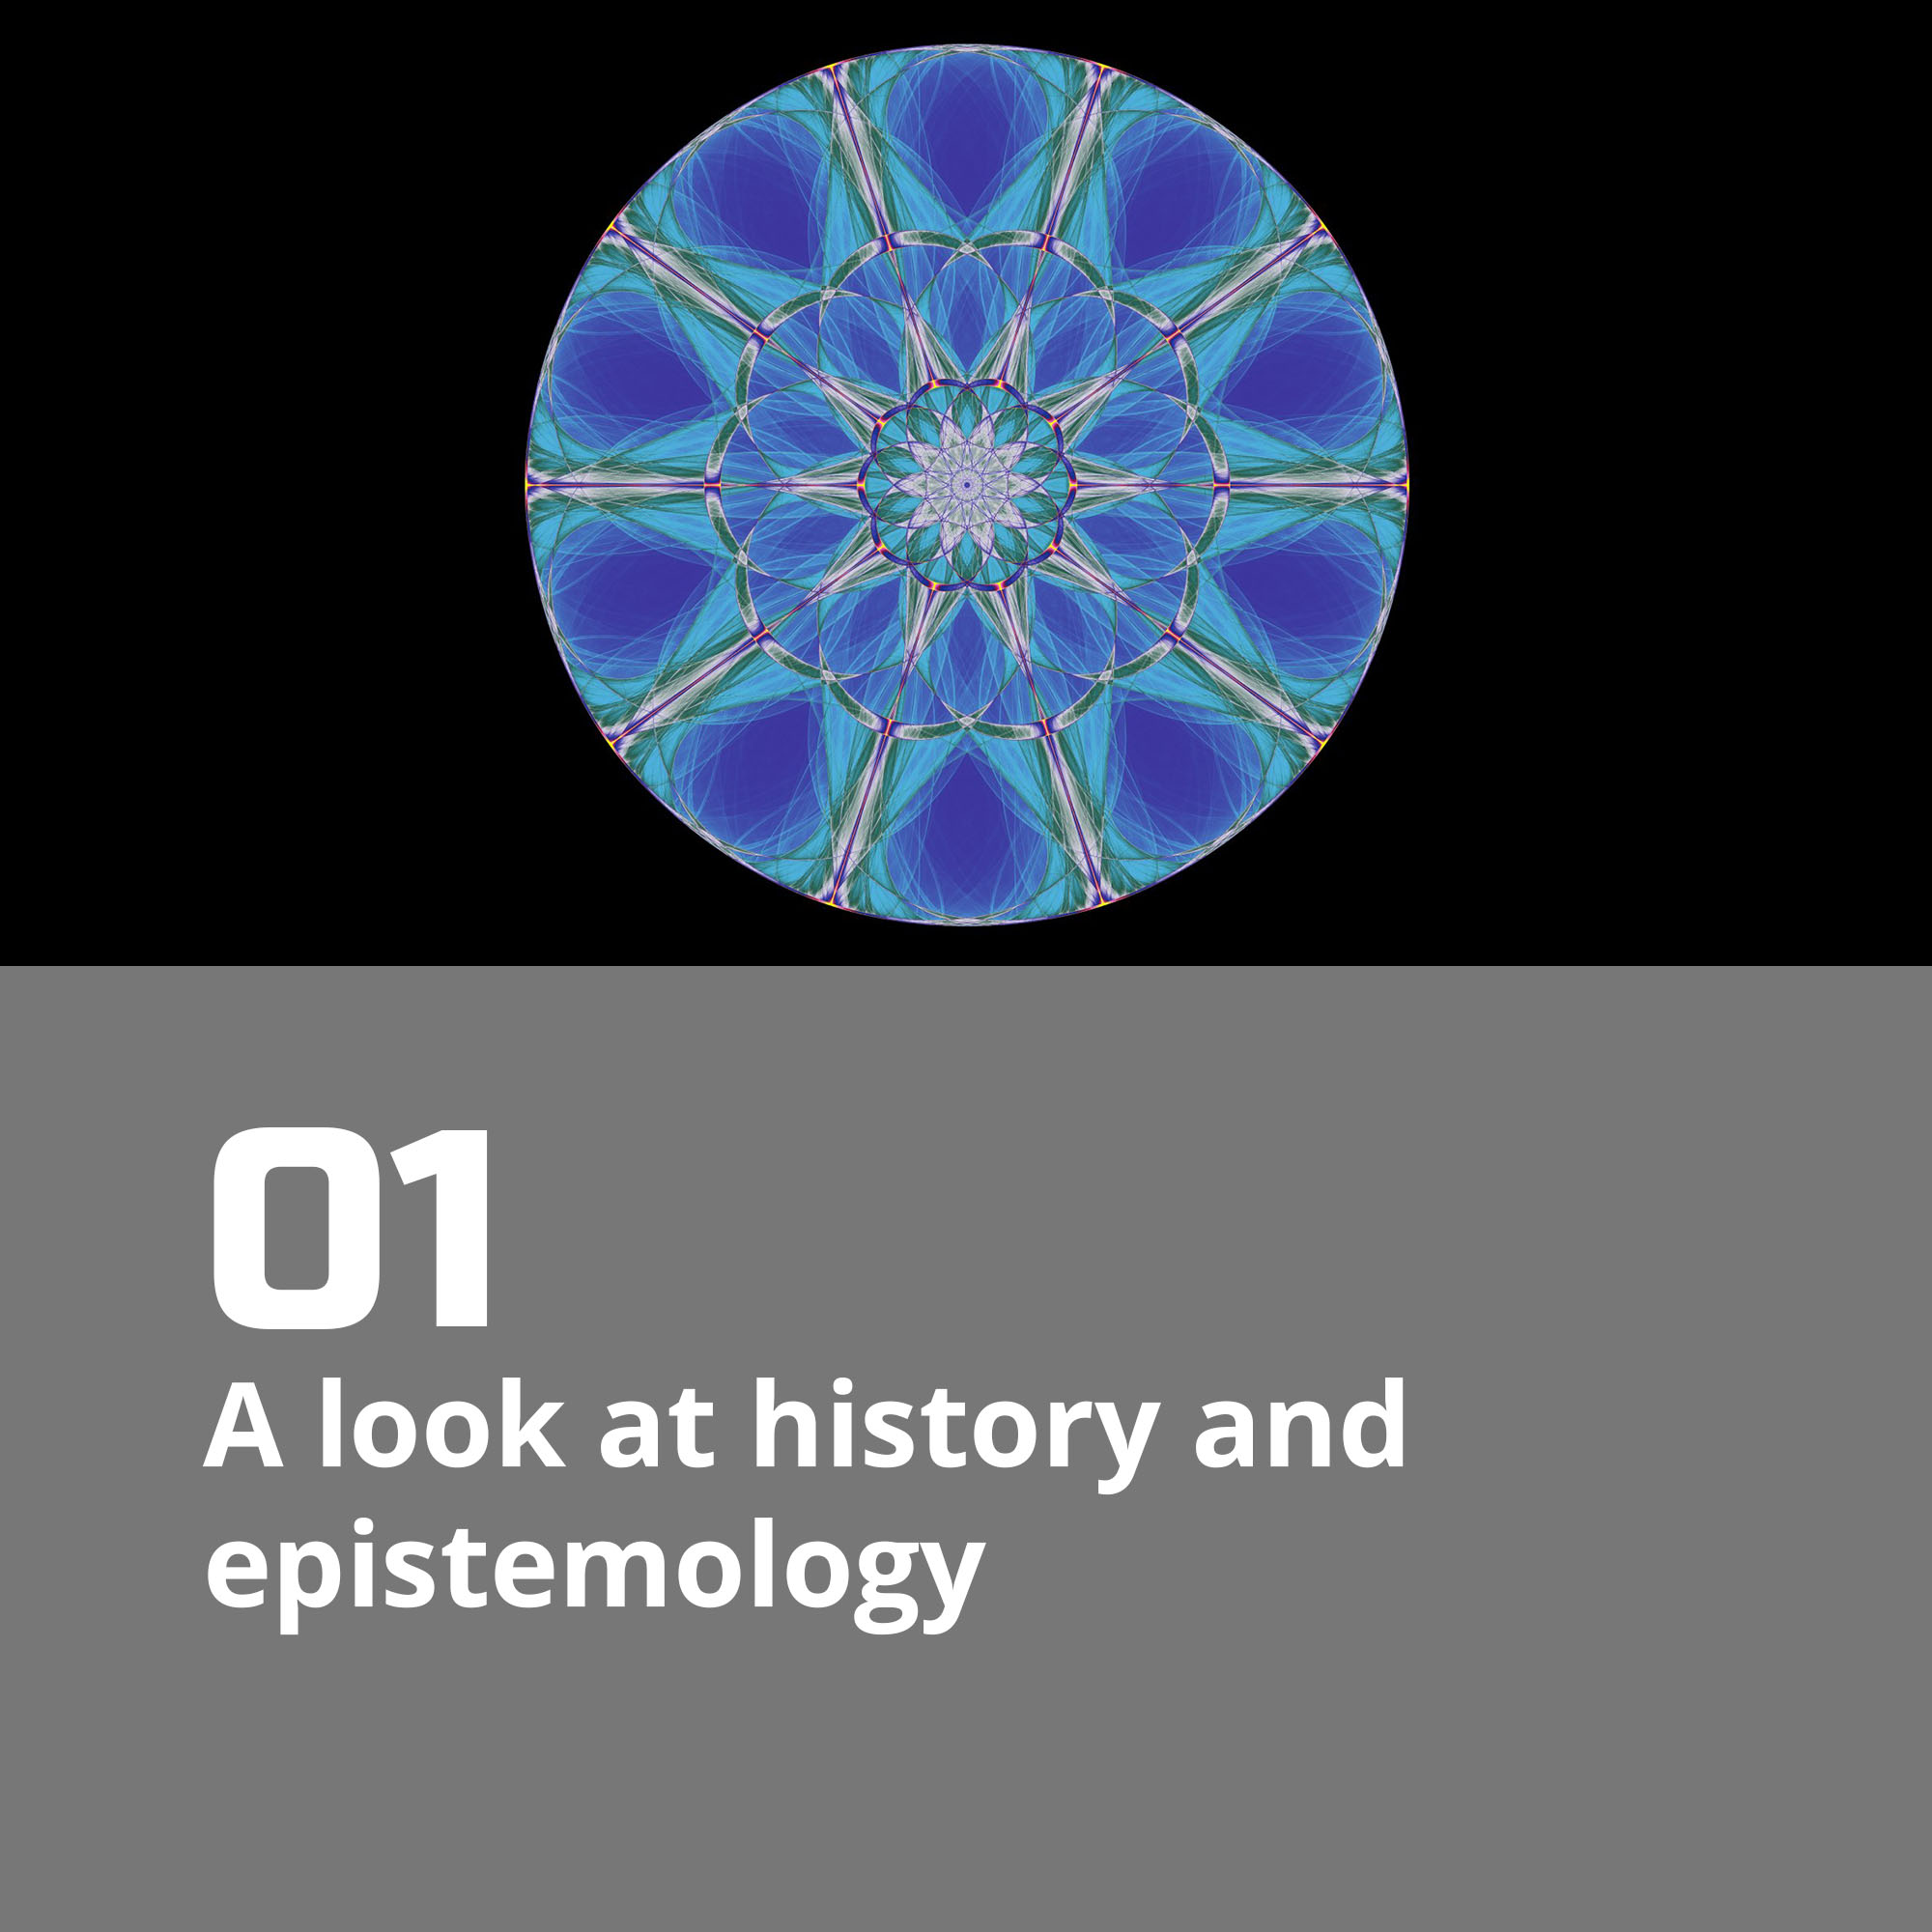 01. A look at history and epistemology